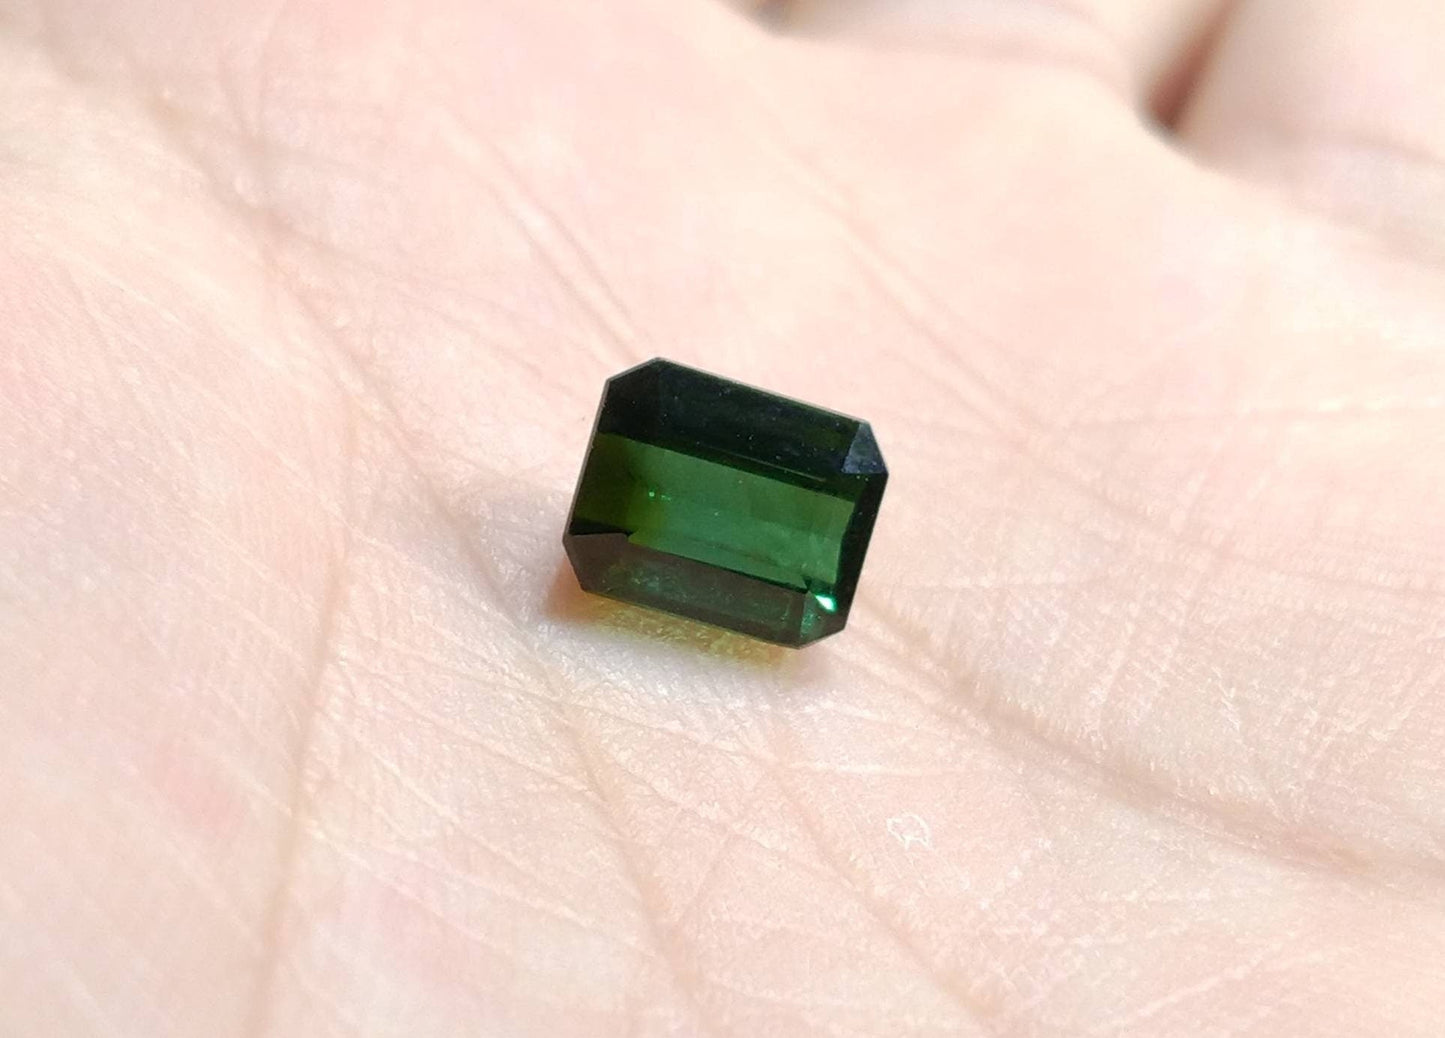 ARSAA GEMS AND MINERALSNatural high quality beautiful 3 carats faceted radiant shape green tourmaline gem - Premium  from ARSAA GEMS AND MINERALS - Just $60.00! Shop now at ARSAA GEMS AND MINERALS